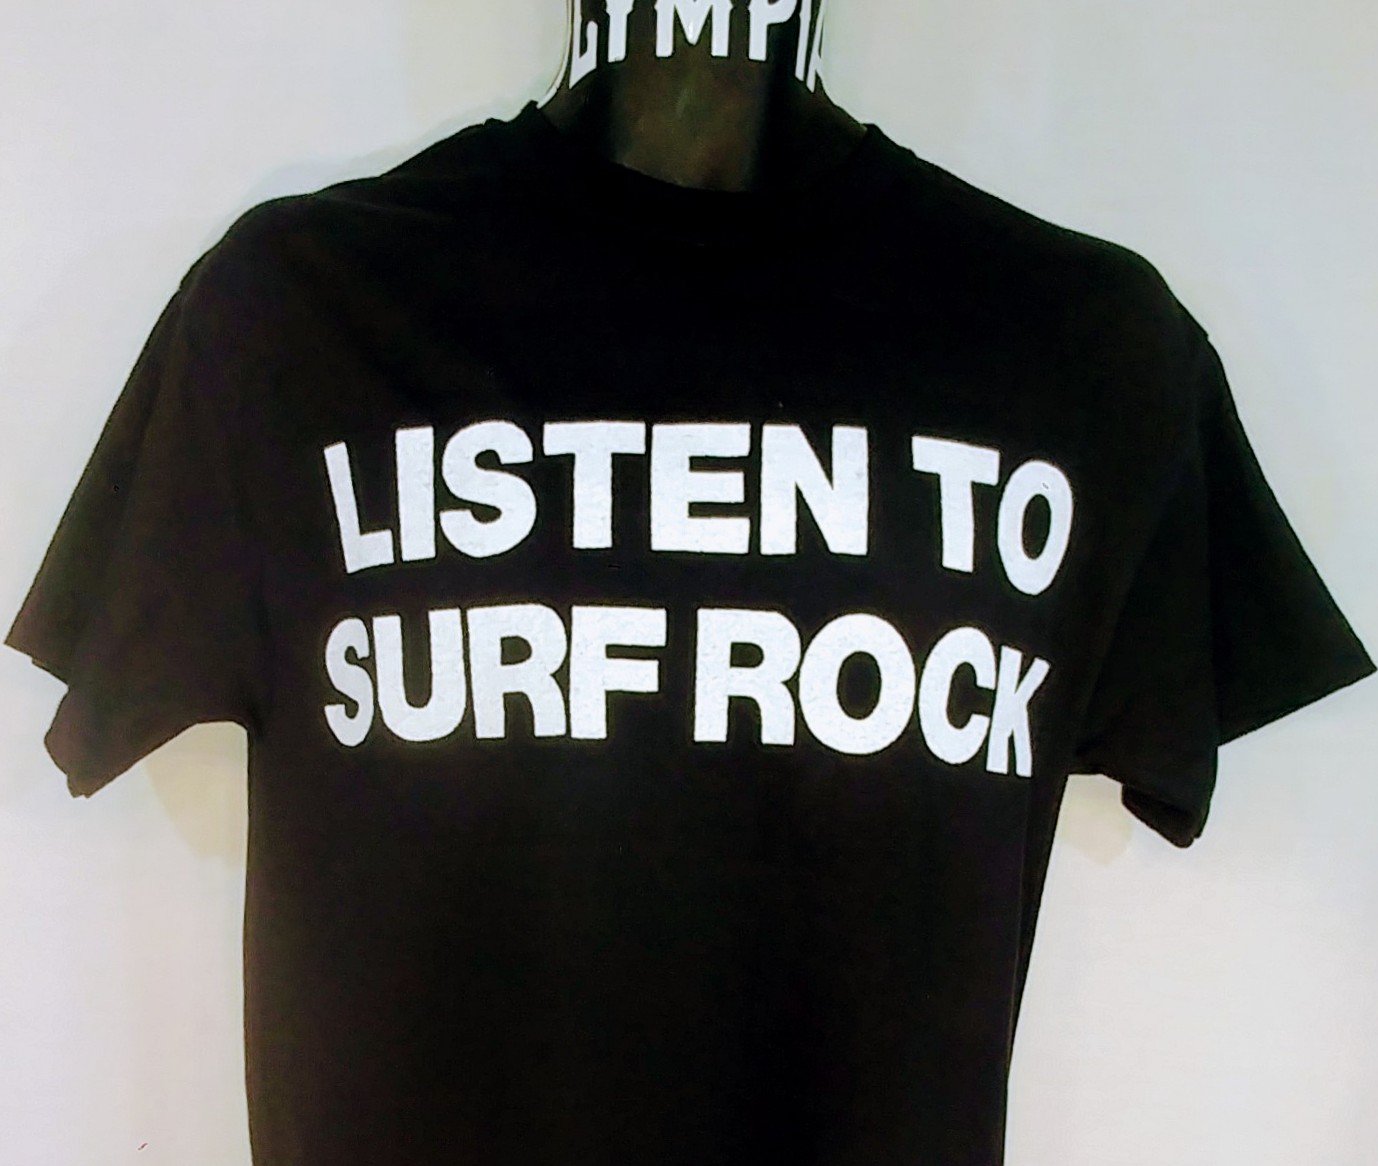 Image of Didactic: "Listen to Surf Rock" - Shred Life Collab.